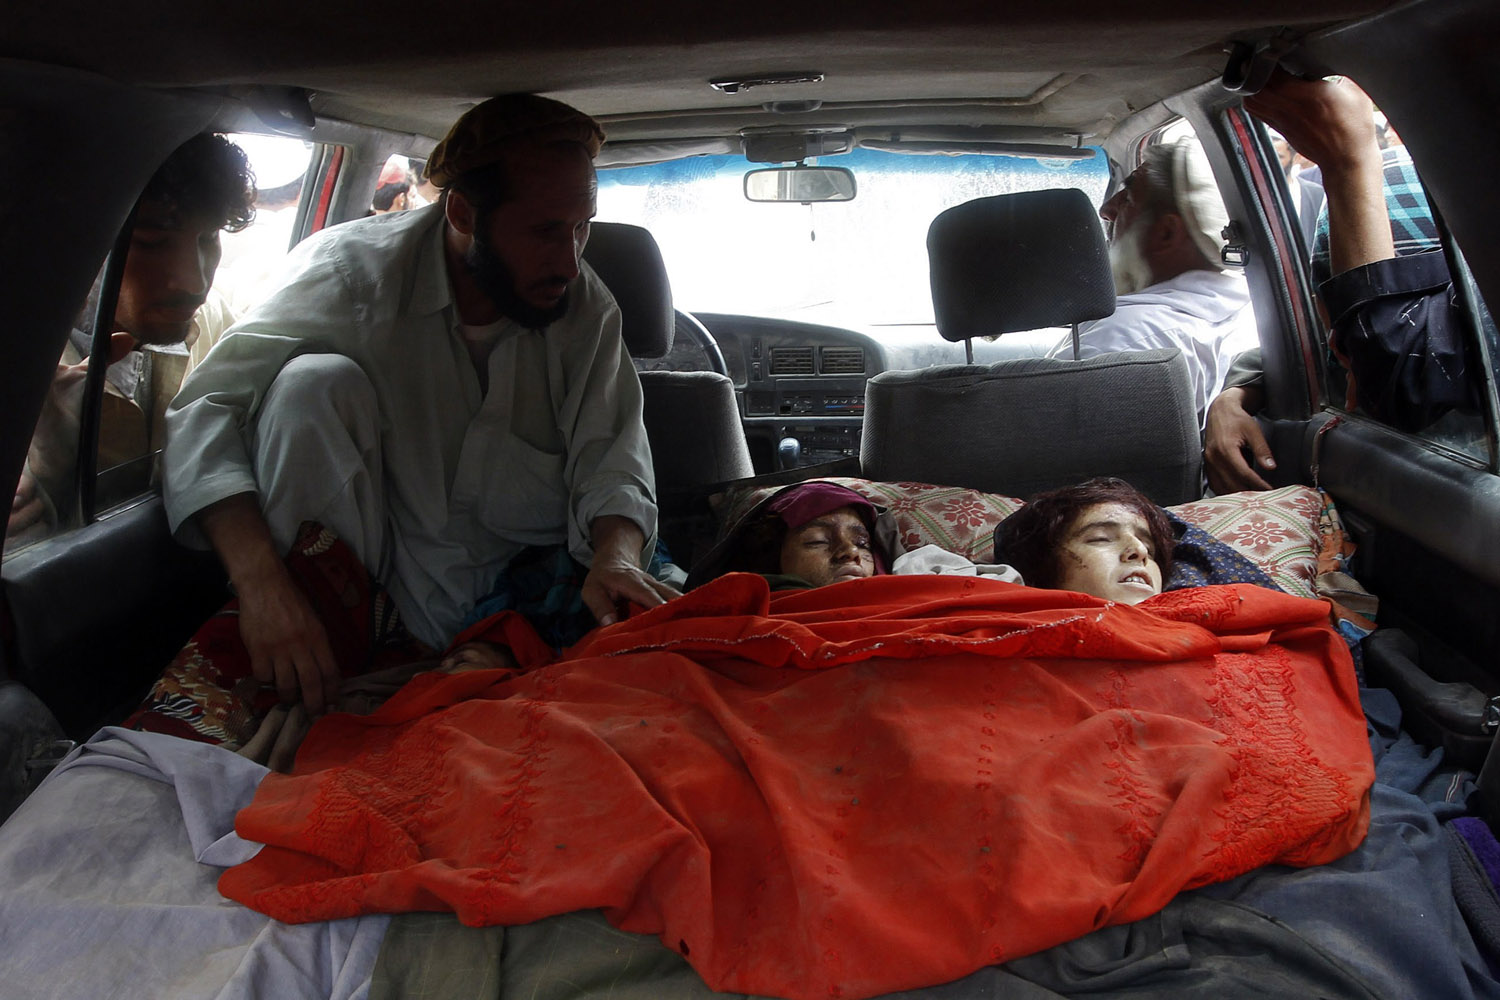 Sept. 16, 2012. Afghan villagers look at the bodies of women killed by NATO air strikes in Laghman province.